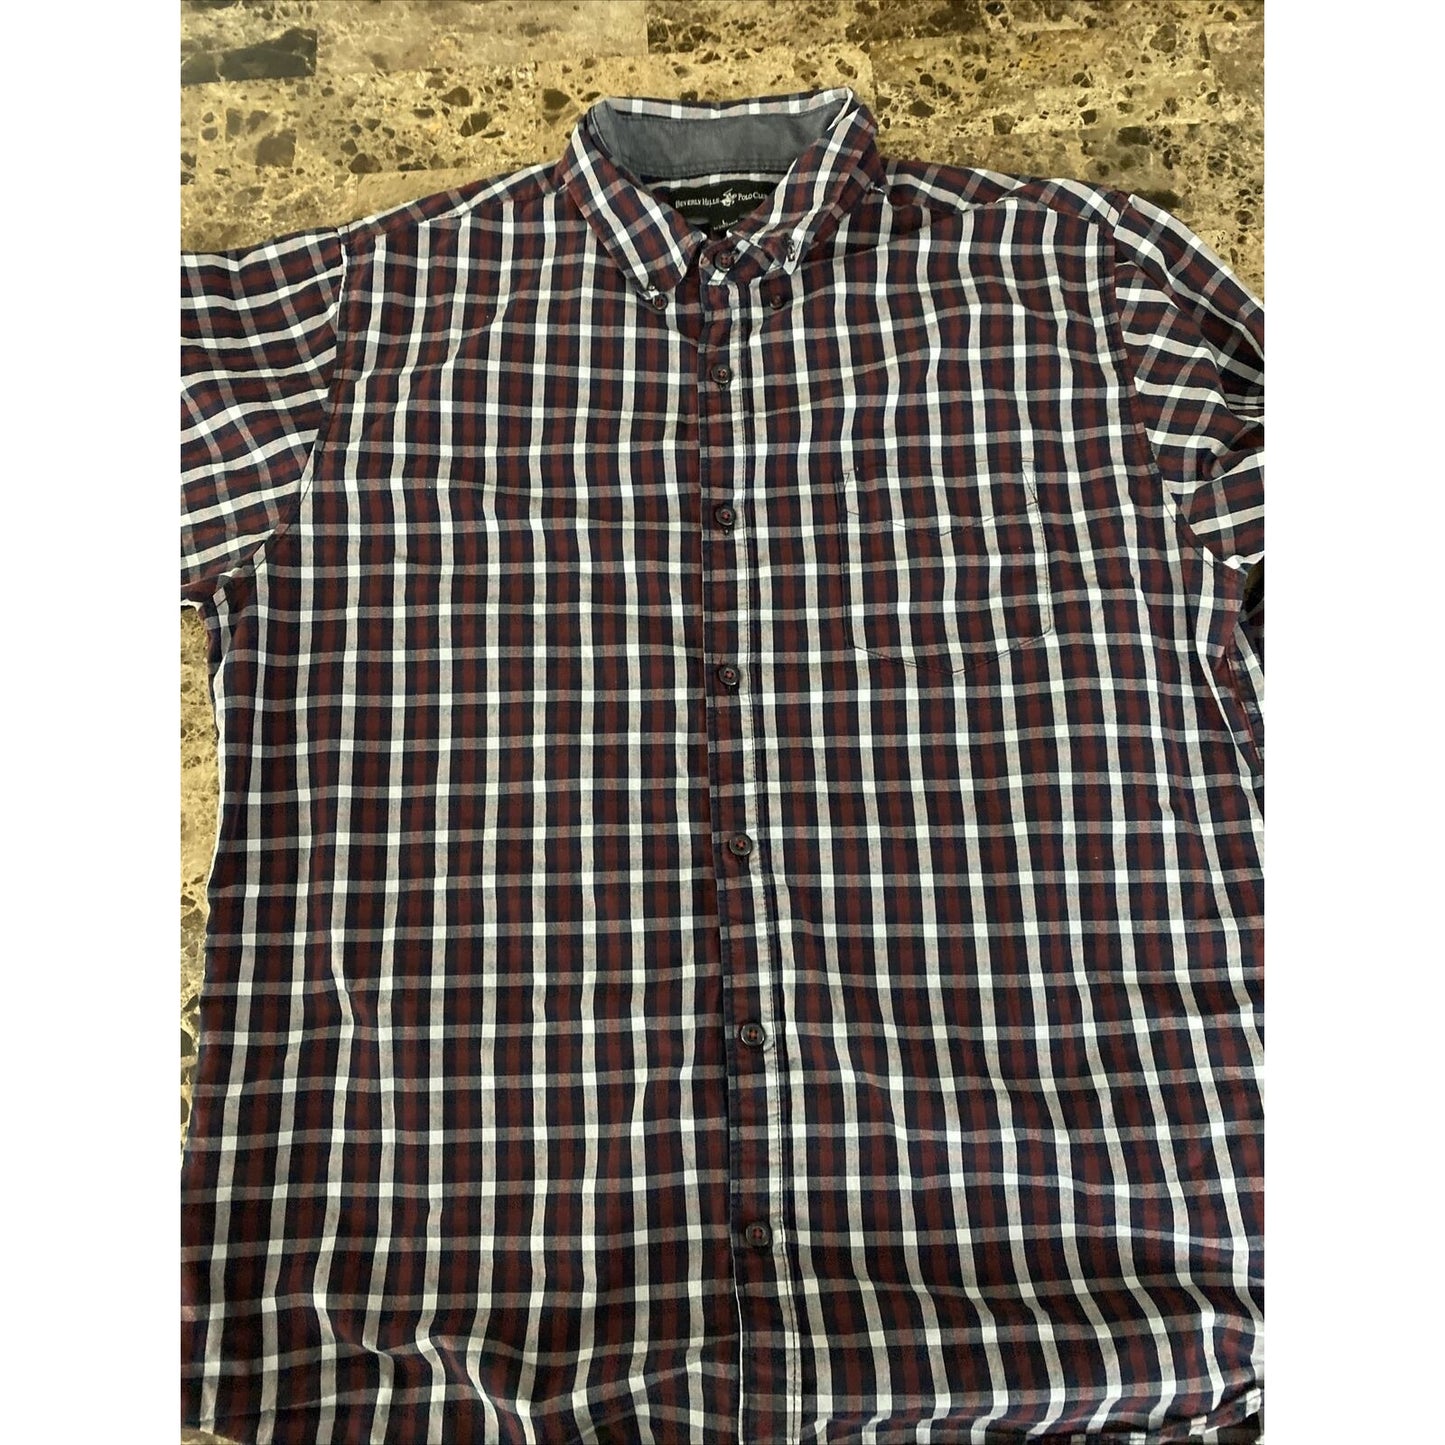 Beverly Hills Polo Club Mens Large White Red Black Plaid Button-down Long Sleeve